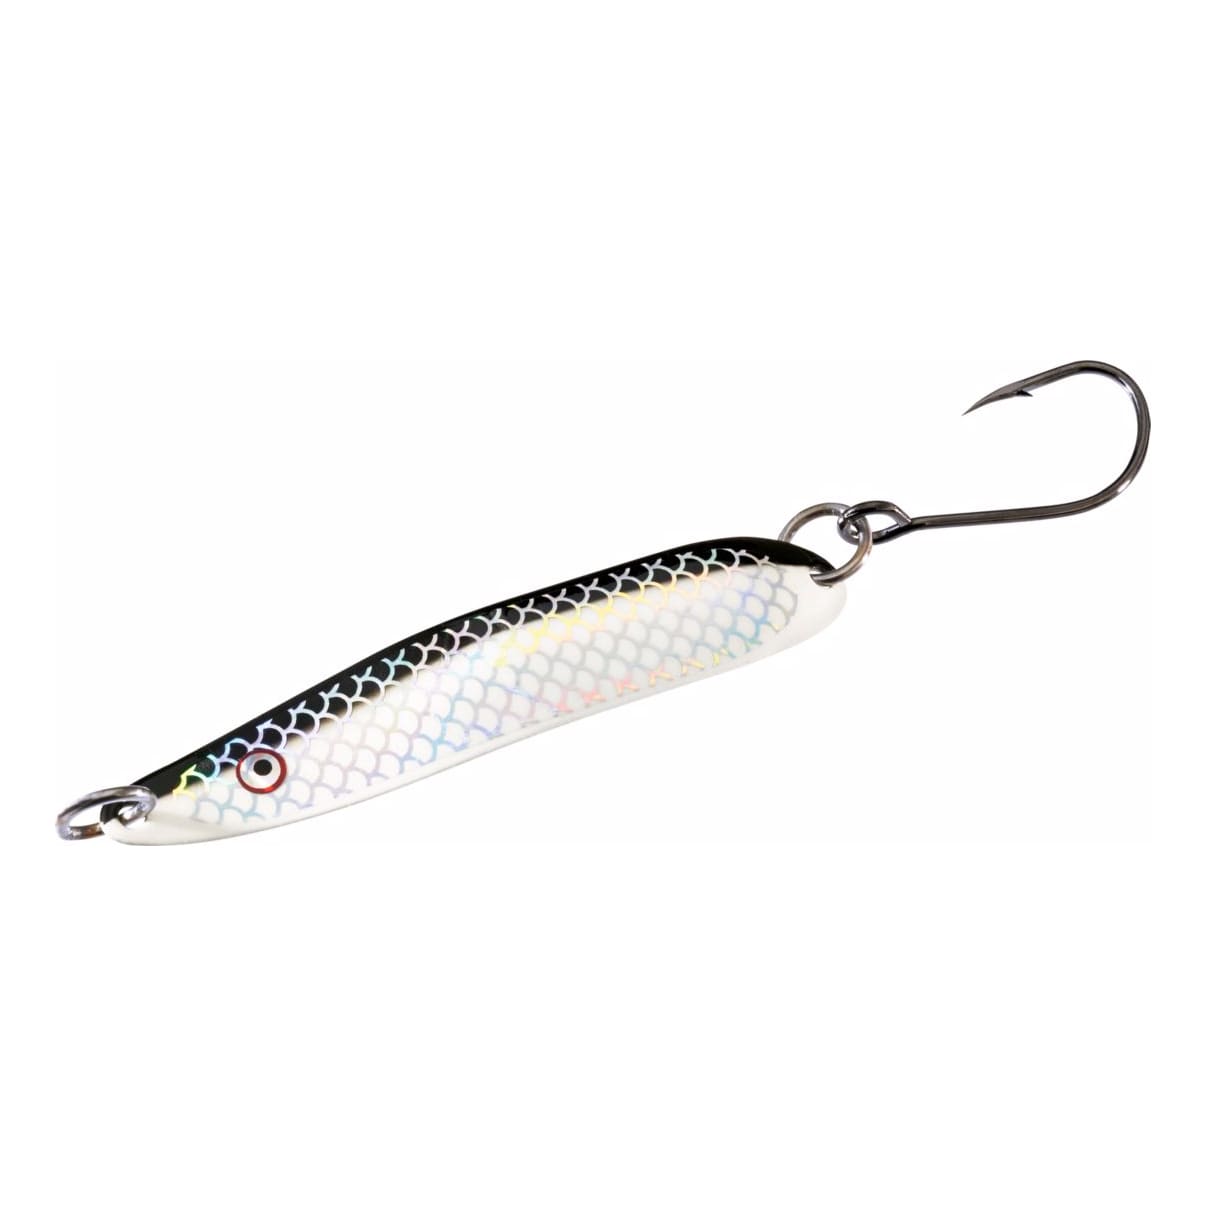 Westcoast Fishing Tackle Phat-e Spoon - Joly Rancher